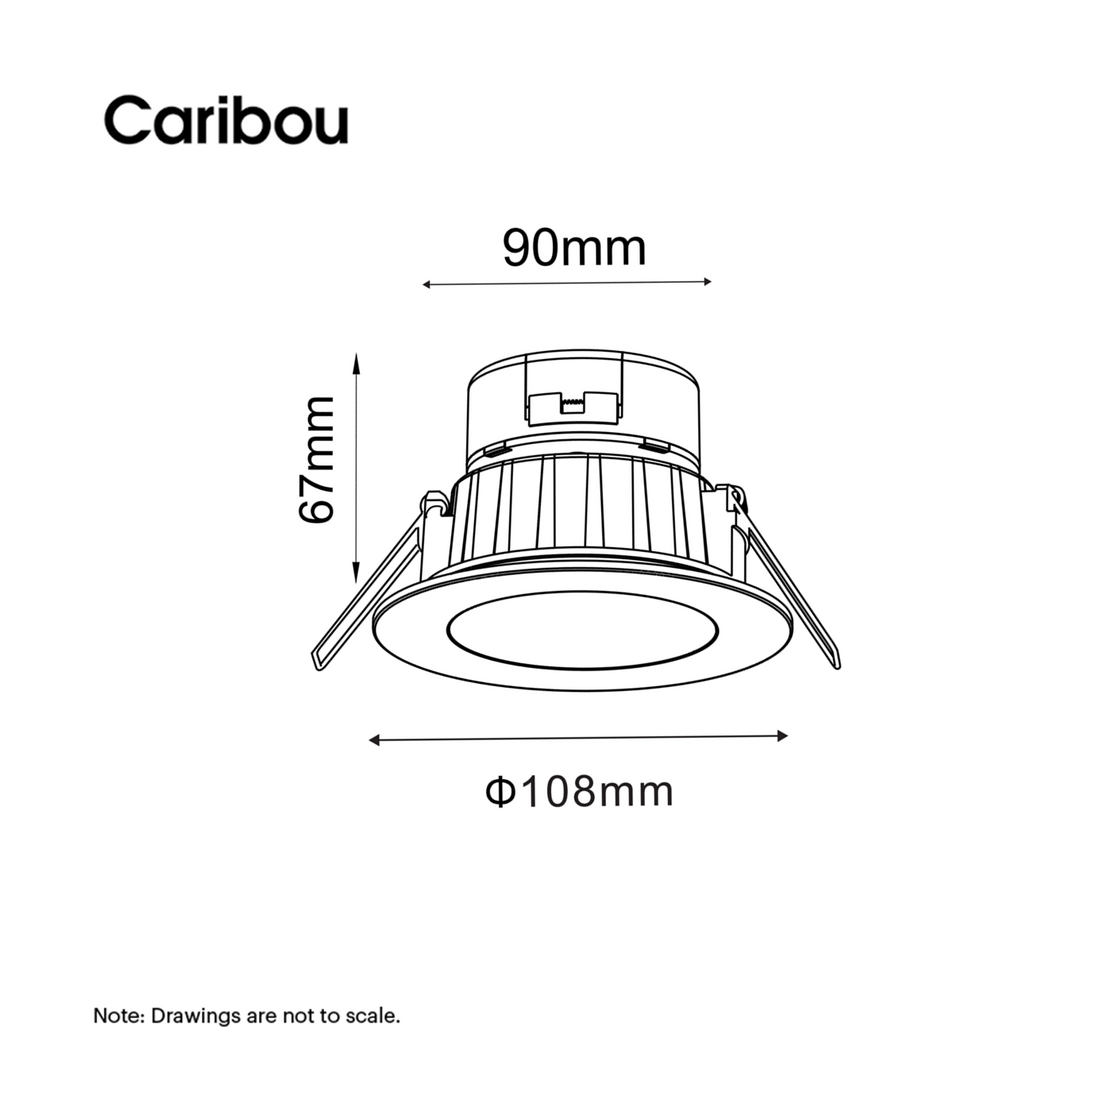 Marlin 10W Recessed LED Down Light (IC4 Rated) IP44 Rated 3000K (Warm White) White Finish